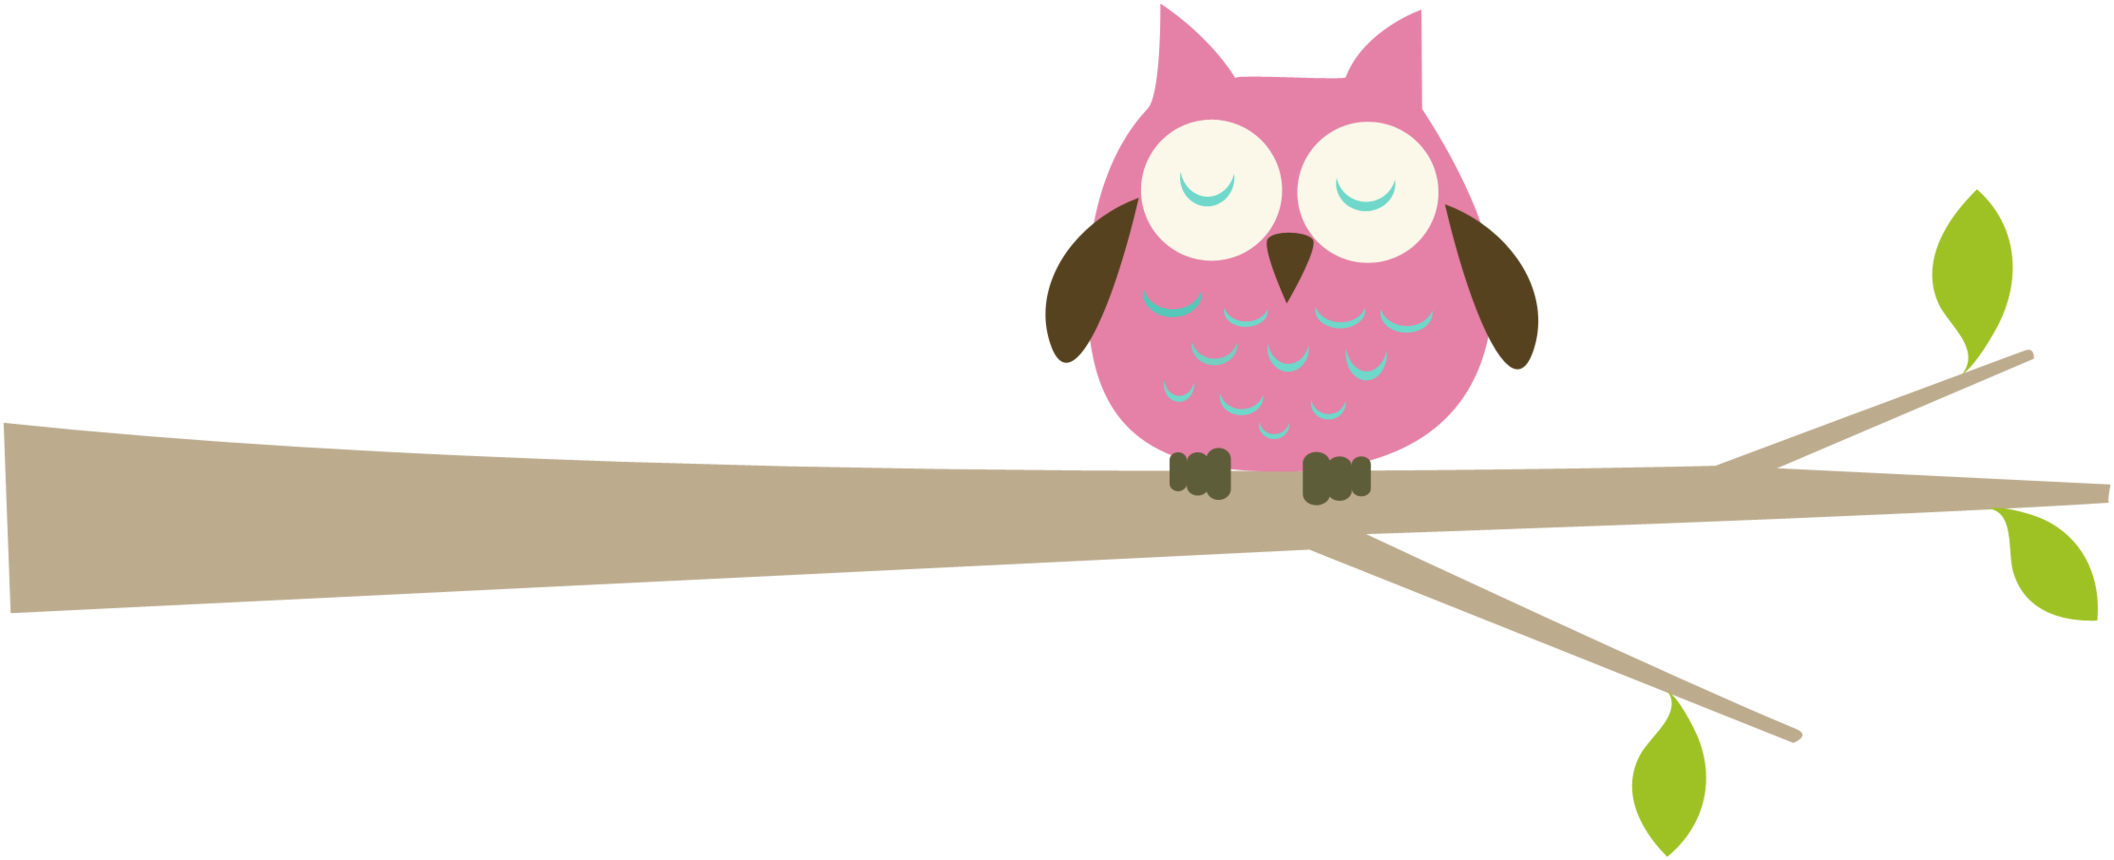 Free Owl Owls To Use Resource Clipart